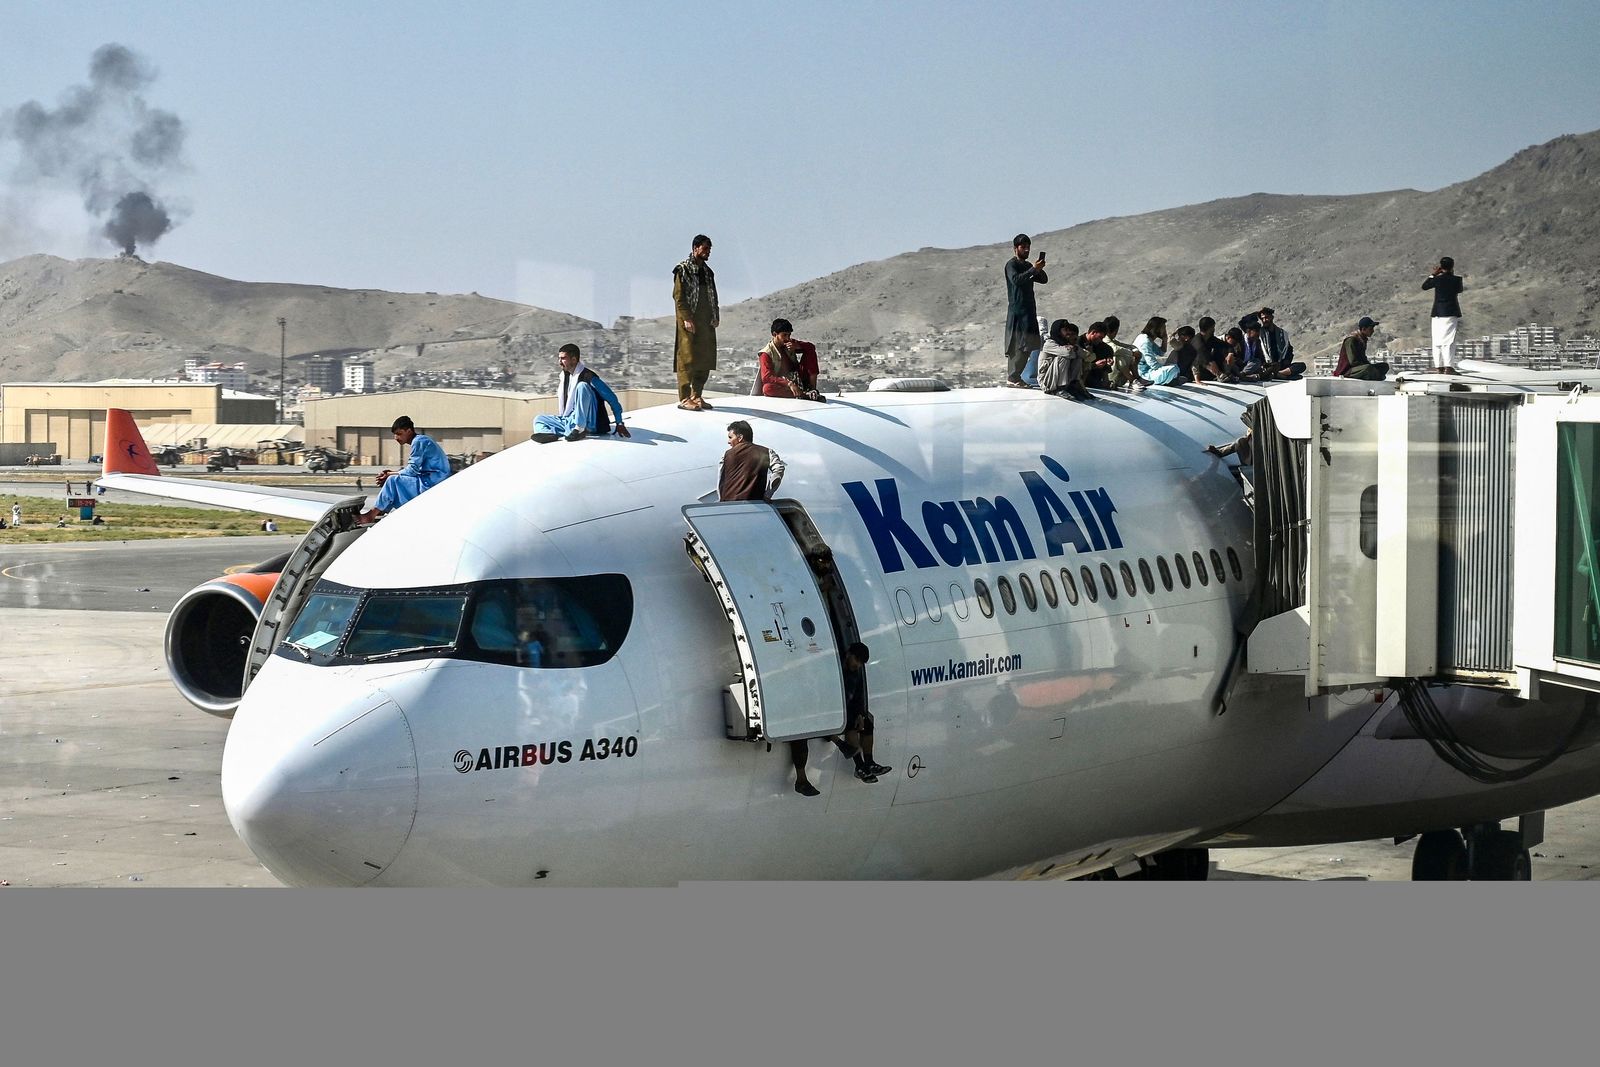 Afghan people climb atop a plane as they wait at the airport in Kabul on August 16, 2021, after a stunningly swift end to Afghanistan's 20-year war, as thousands of people mobbed the city's airport trying to flee the group's feared hardline brand of Islamist rule. (Photo by Wakil Kohsar / AFP) - AFP